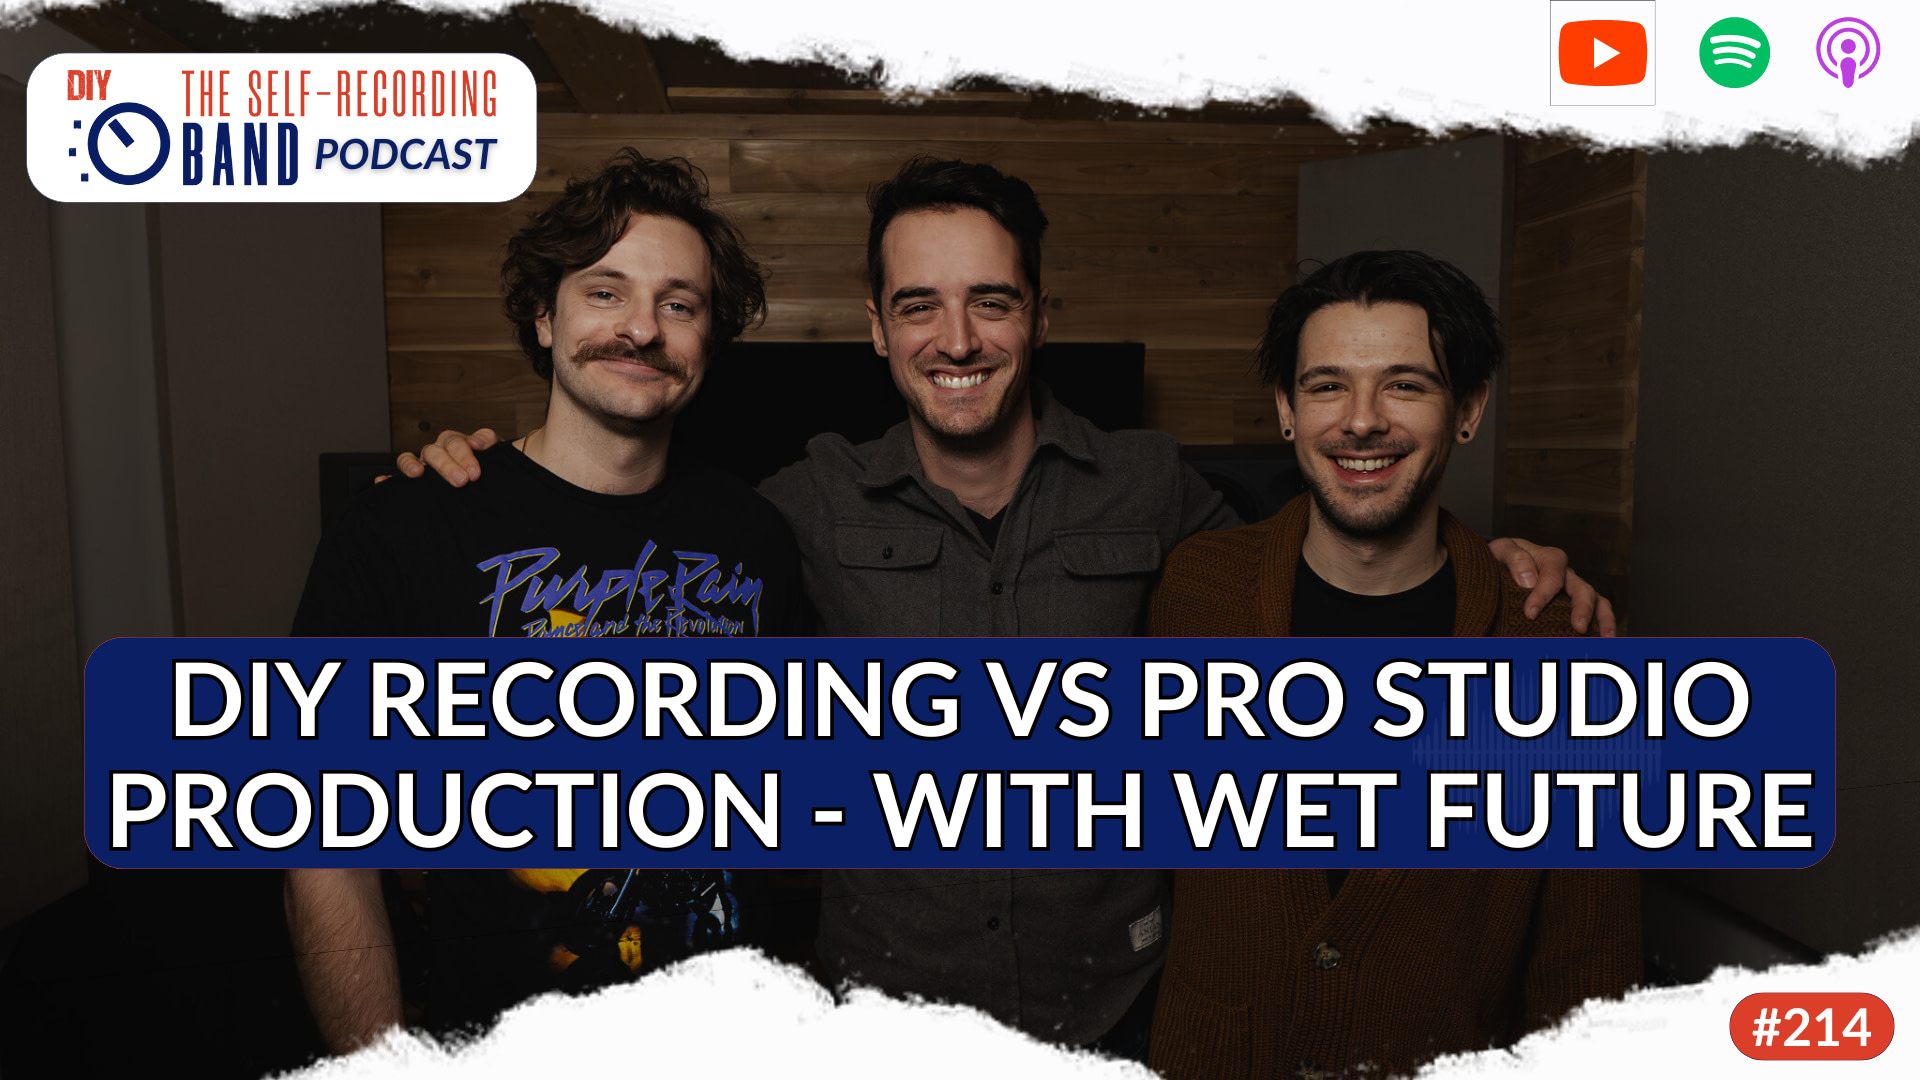  DIY Recording VS Pro Studio Production - How Wet Future Made Both Work And What It Really Takes To Make A Great (DIY-)Record